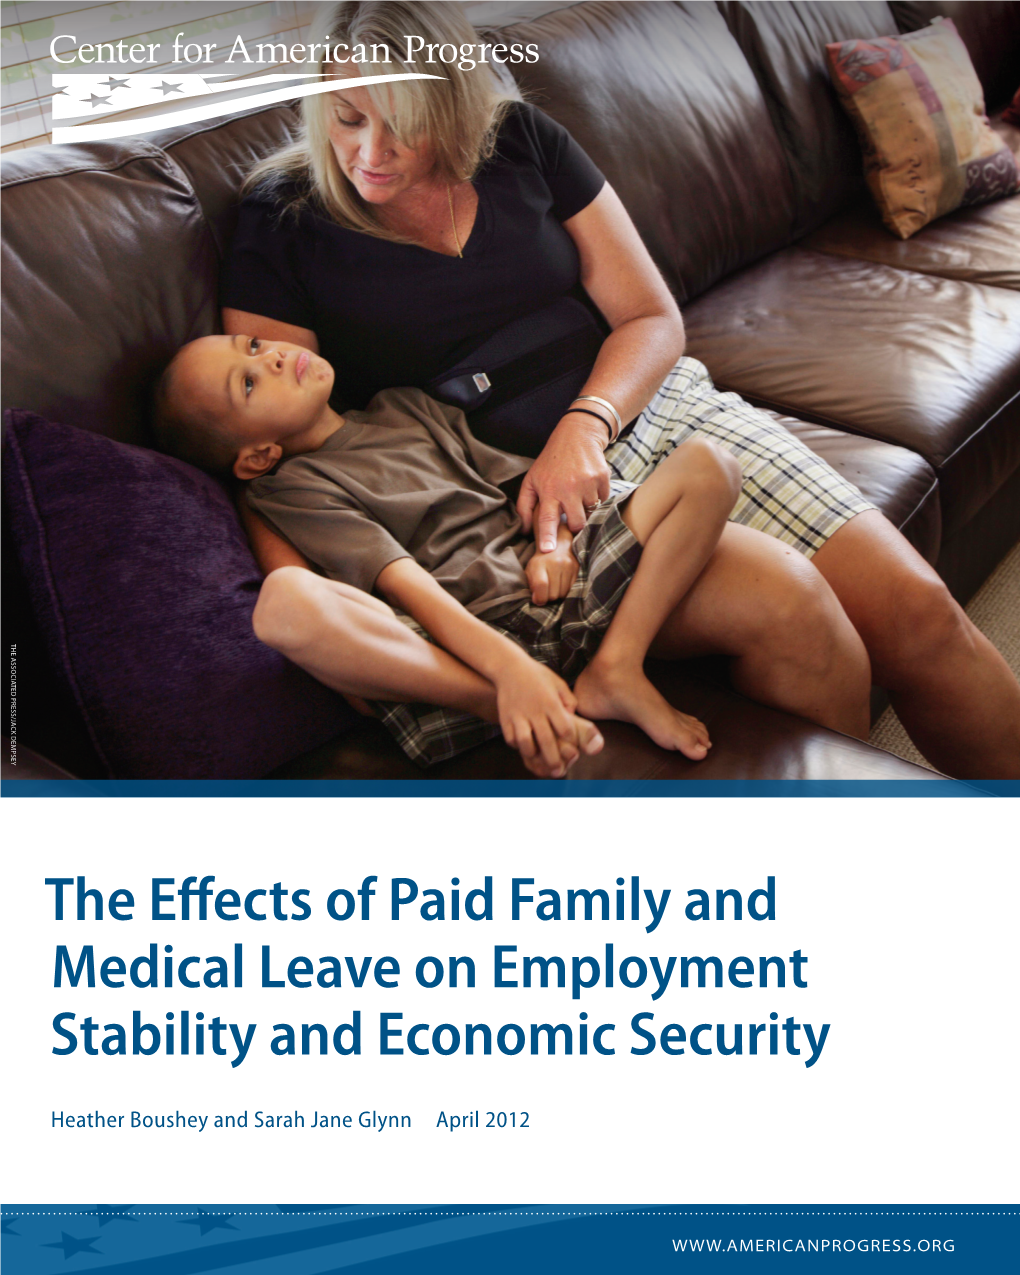 The Effects of Paid Family and Medical Leave on Employment Stability and Economic Security